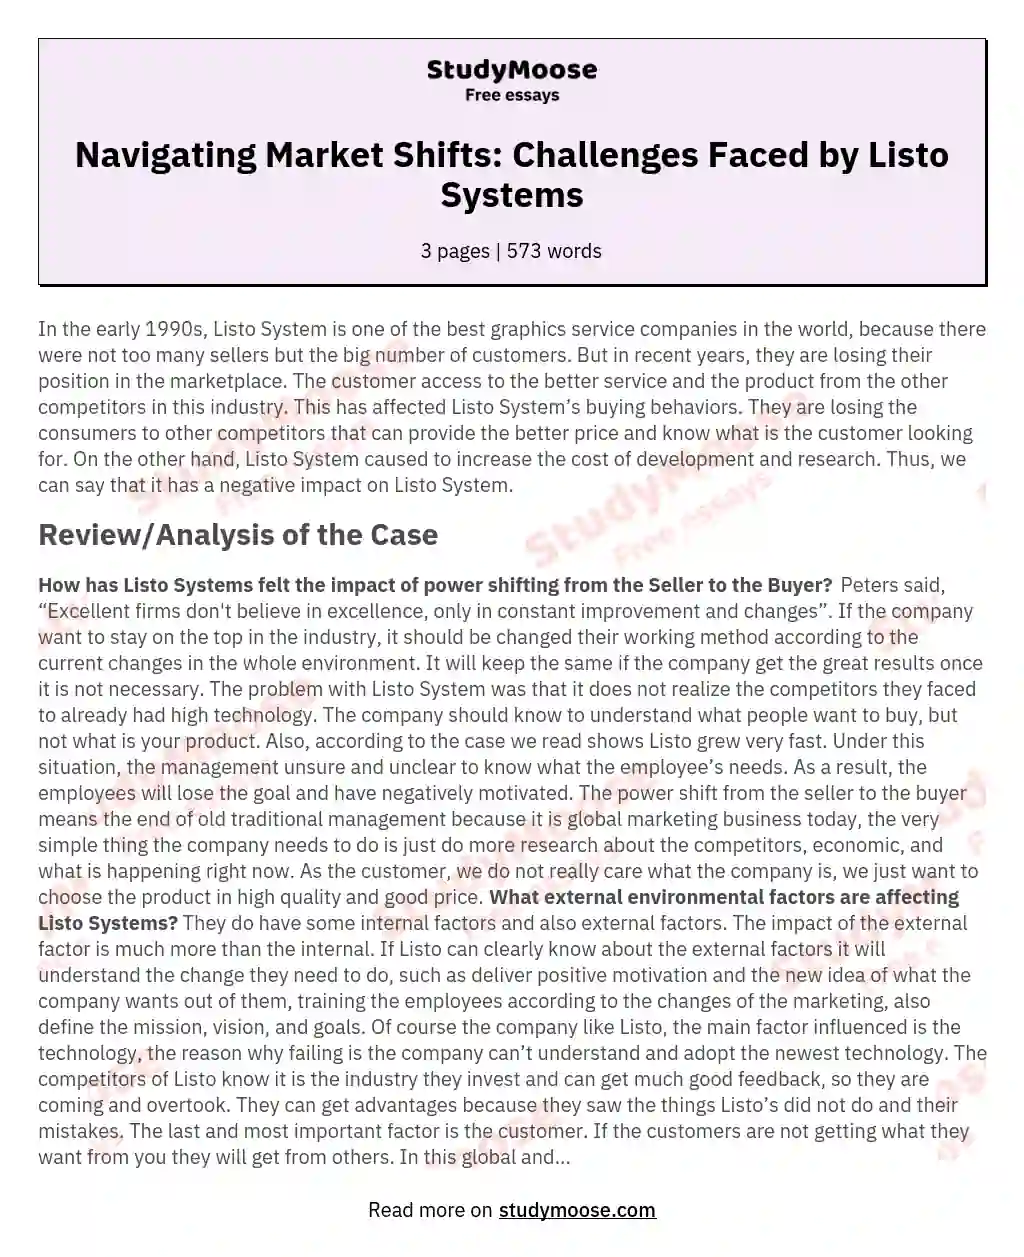 Navigating Market Shifts: Challenges Faced by Listo Systems essay